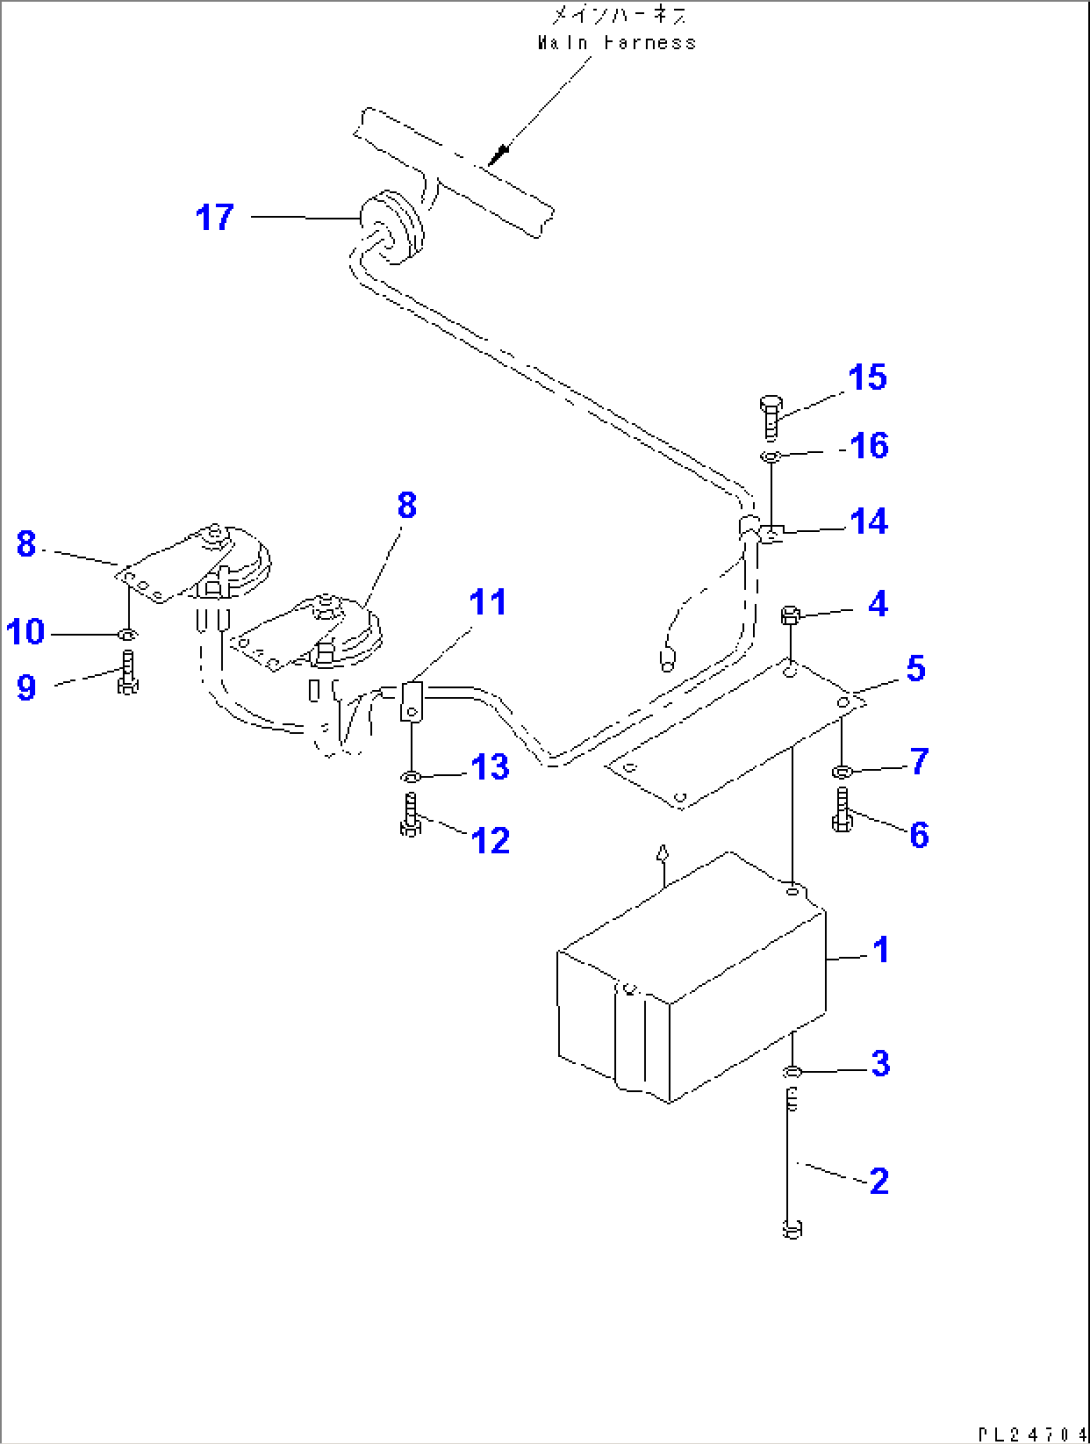 ELECTRICAL SYSTEM (8/9) (HORN)(#1101-)